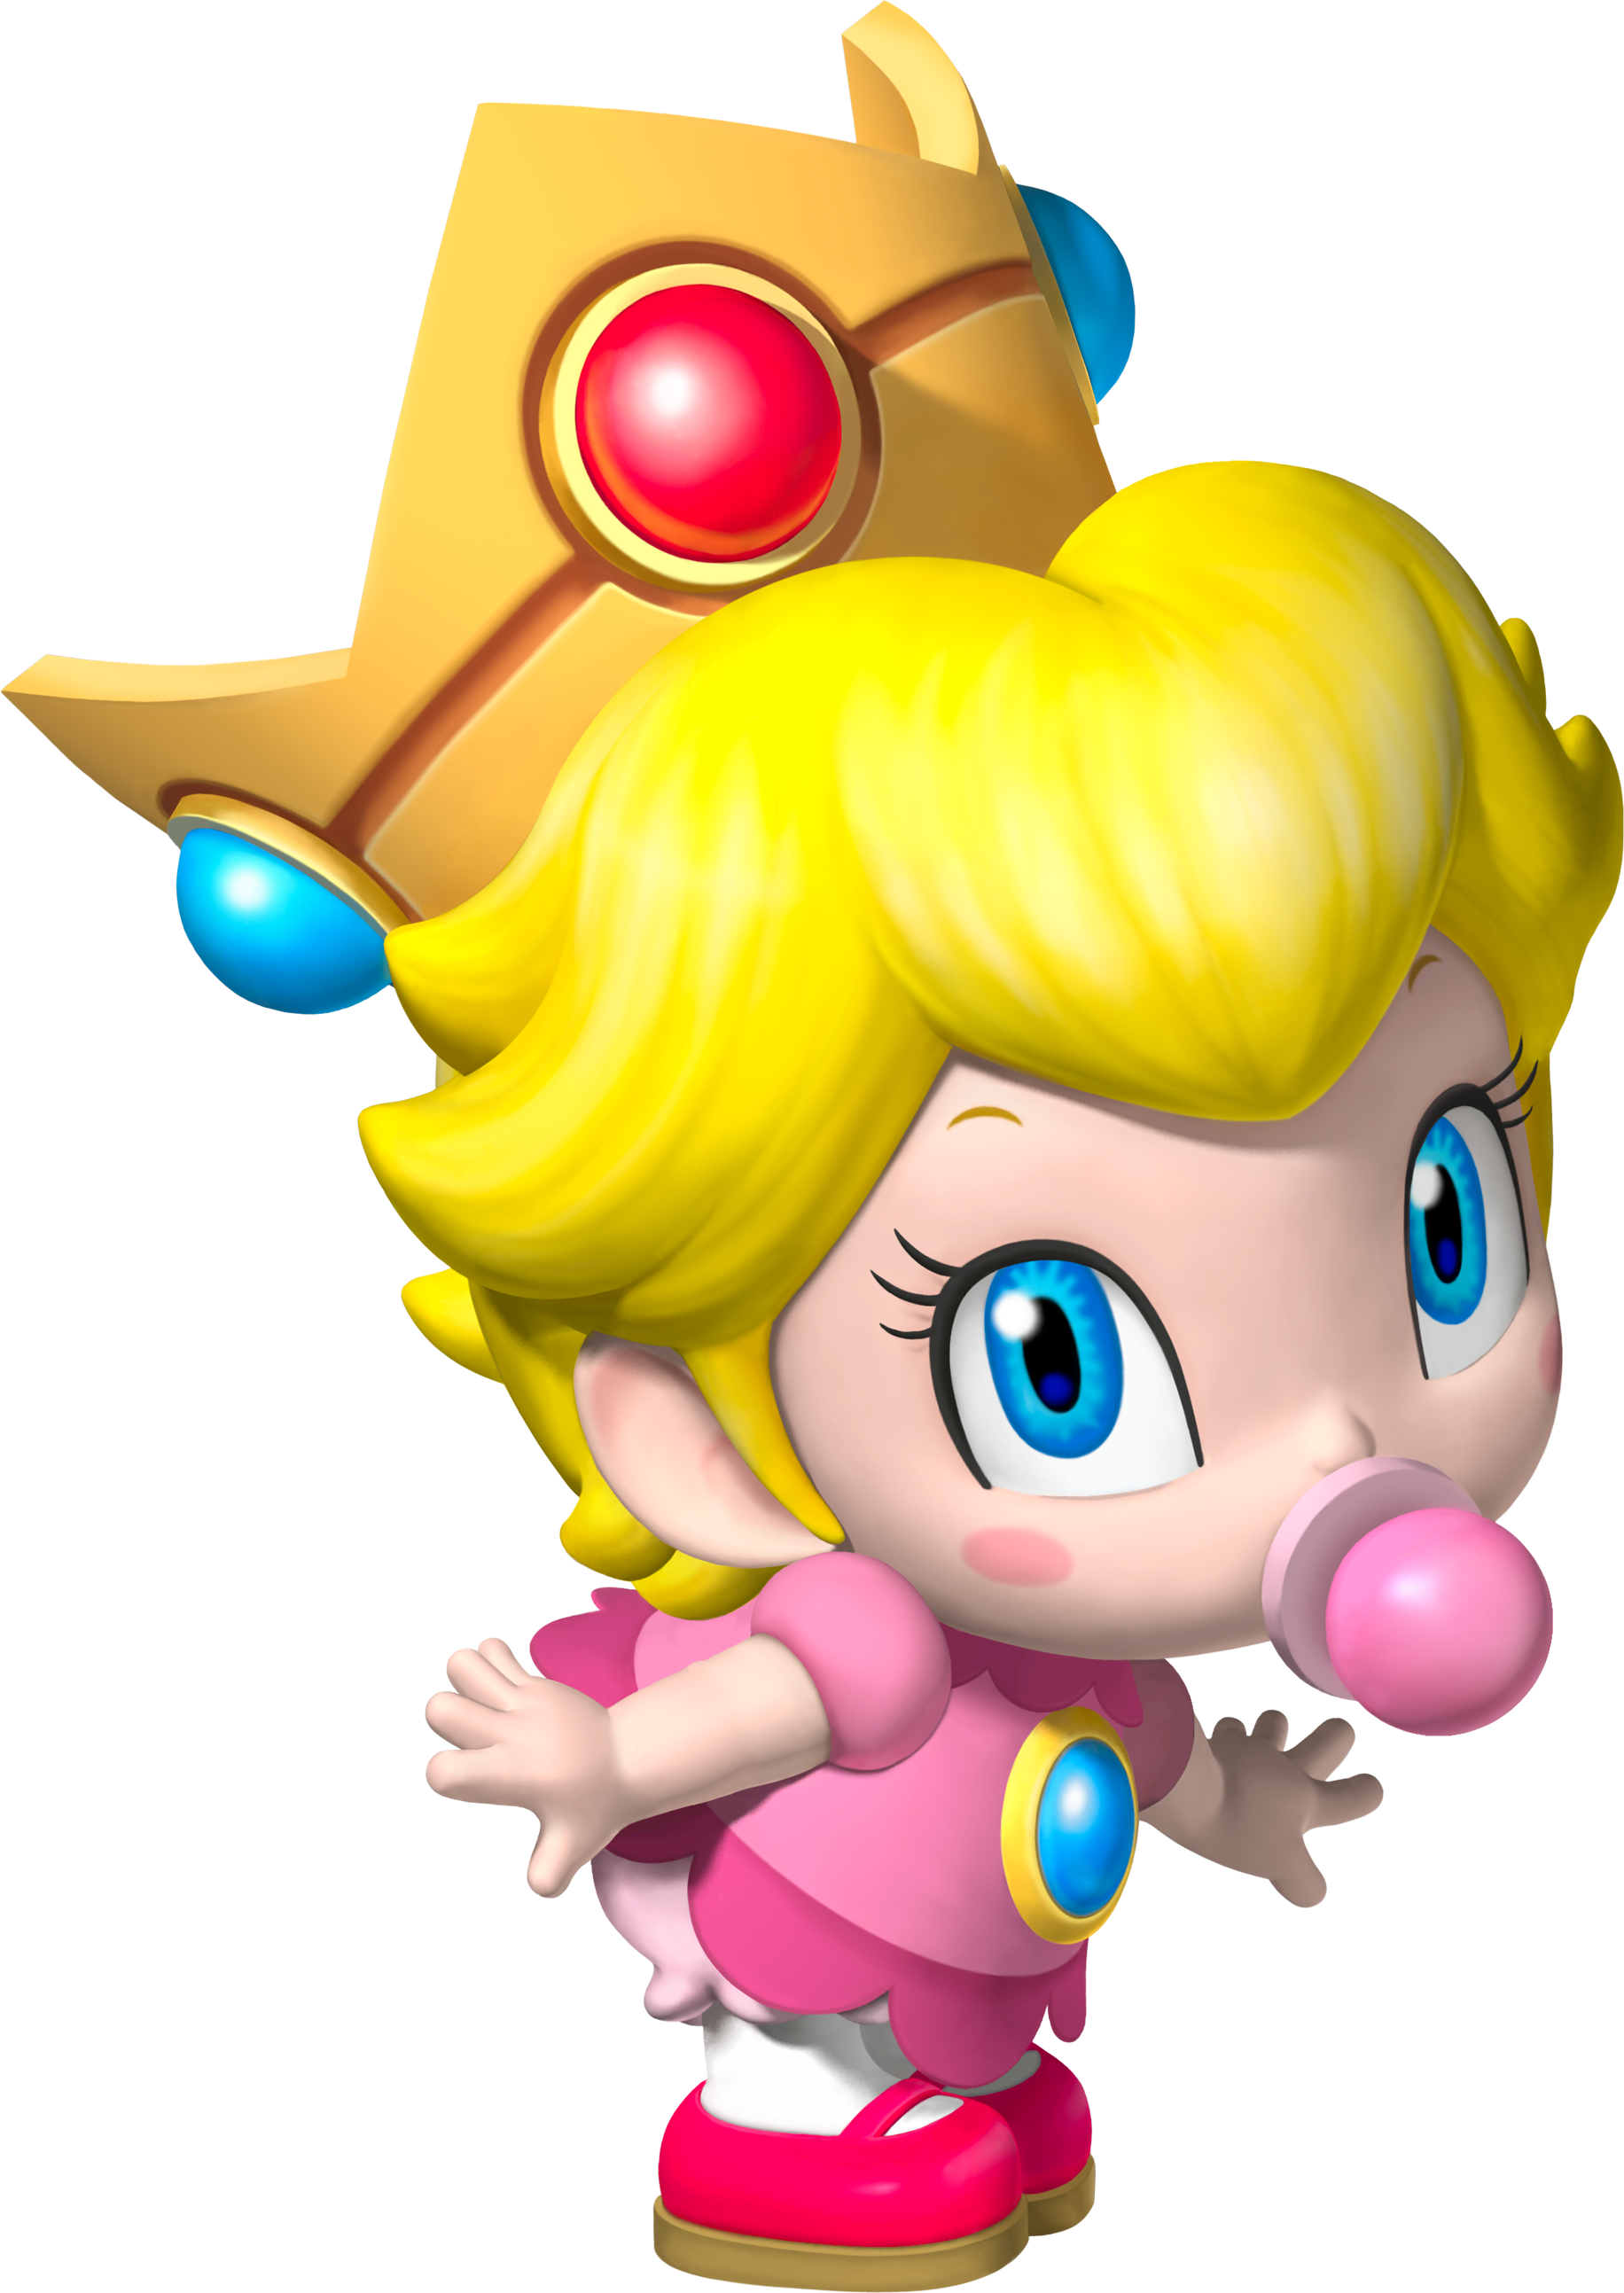 https://static.wikia.nocookie.net/mario/images/1/19/MSS-B%C3%A9b%C3%A9Peach.png/revision/latest?cb=20130702140213&path-prefix=fr